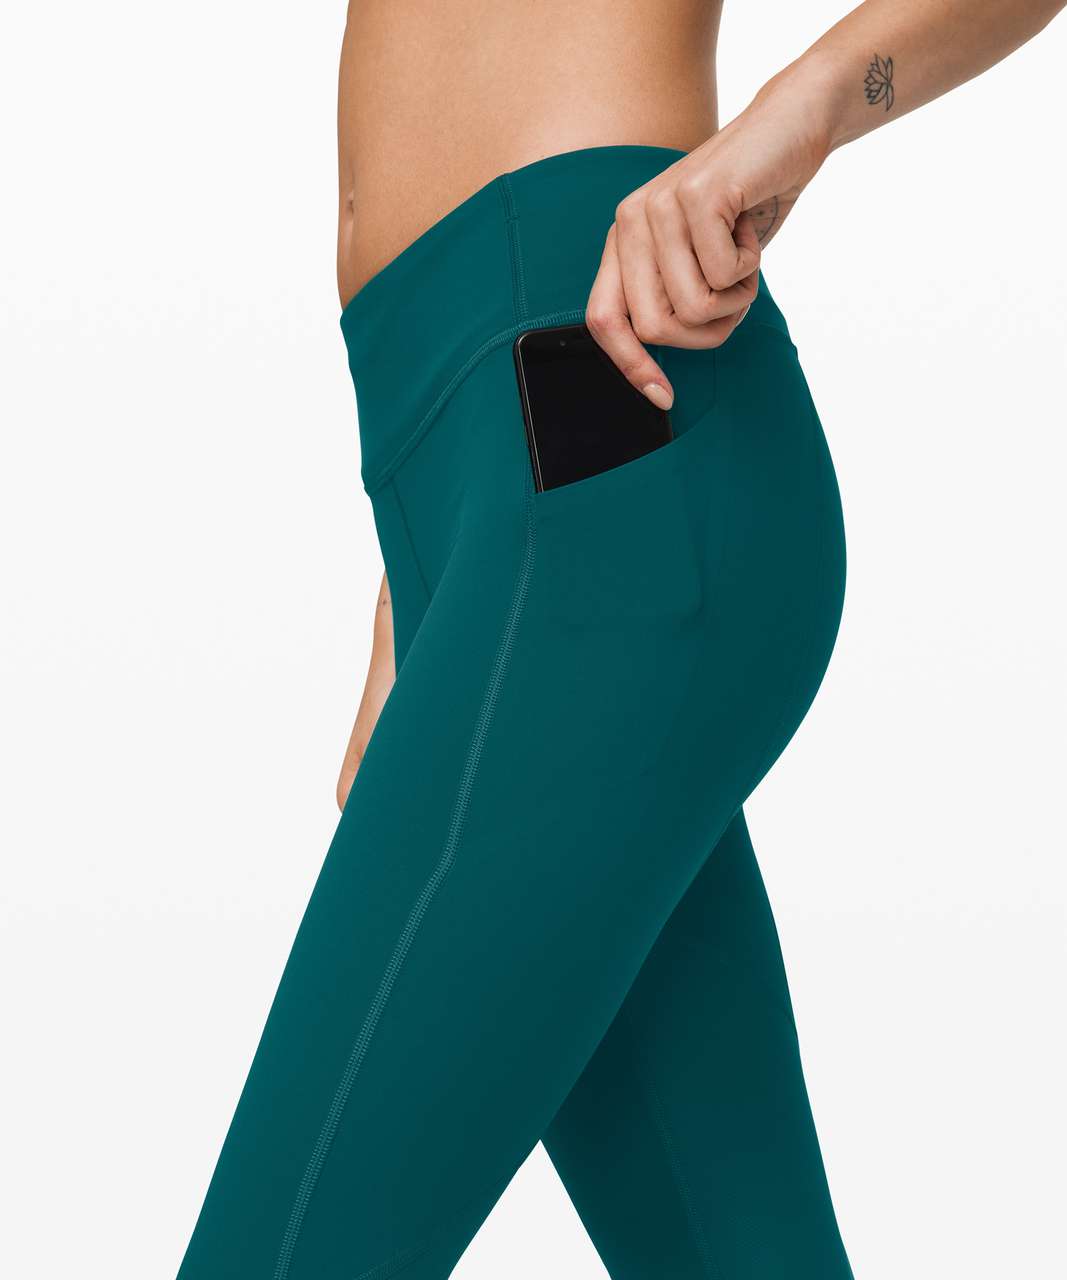 Lululemon Pace Rival Crop *Full-On Luxtreme 22" - Emerald